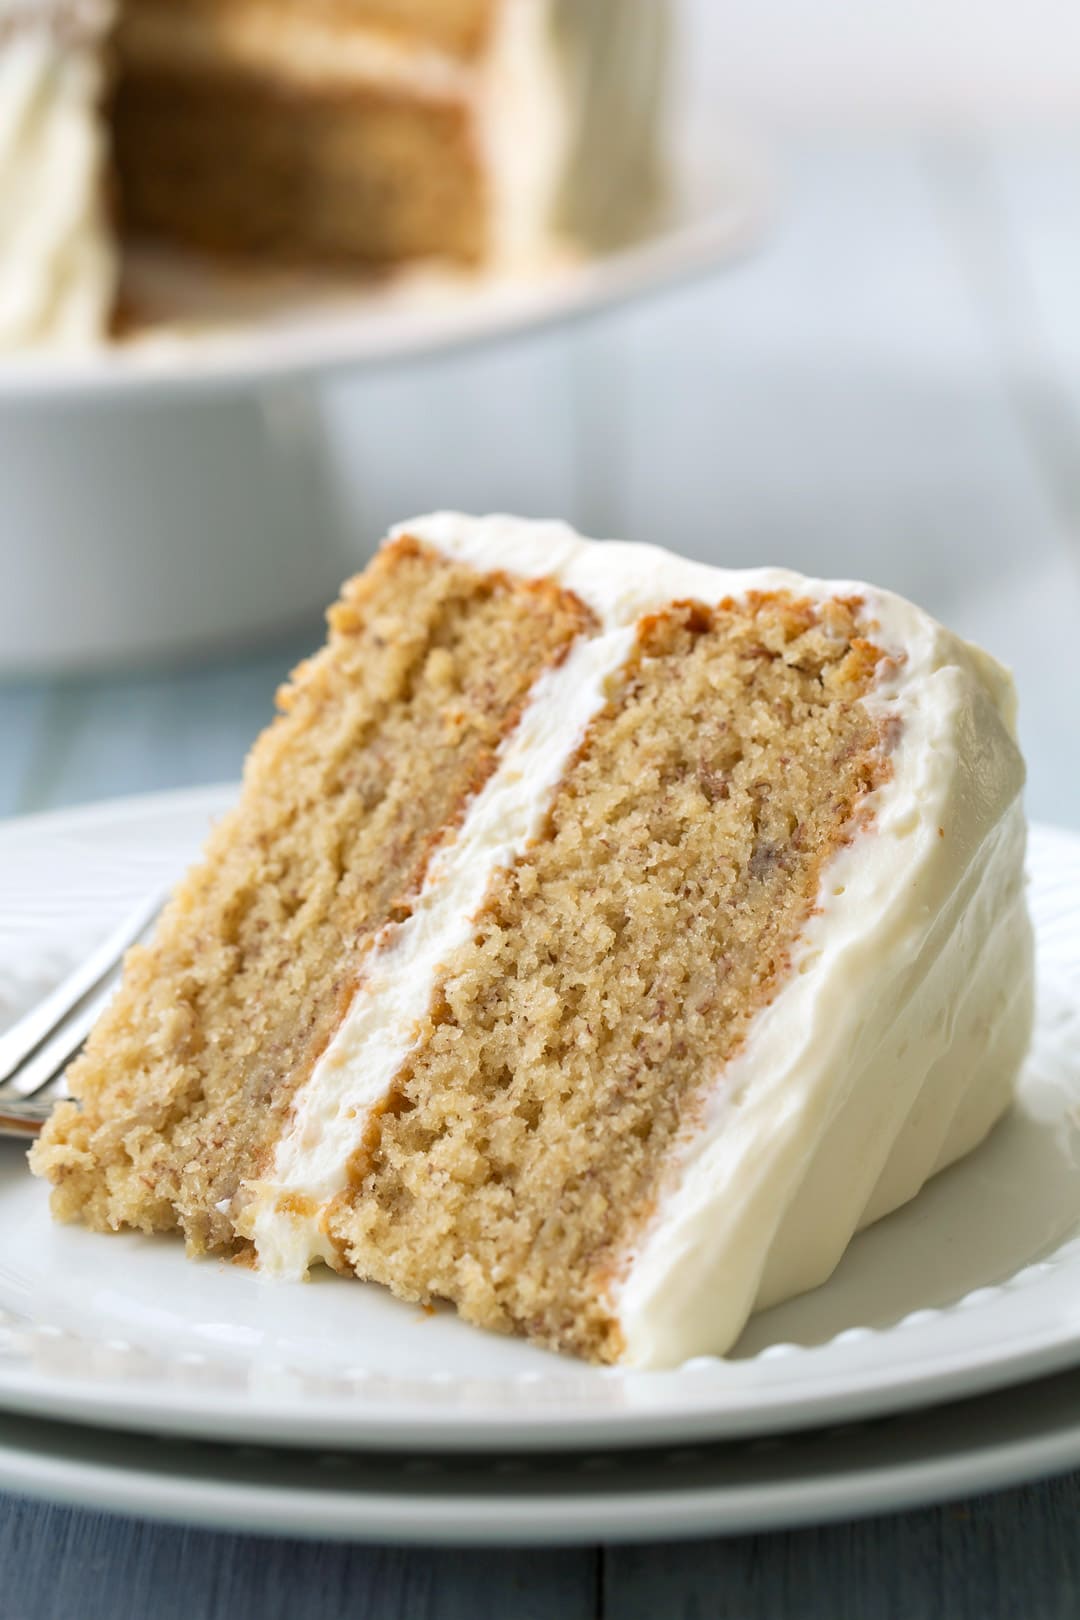 Banana Cake with Fluffy Cream Cheese Frosting | Cooking Classy | Bloglovin’